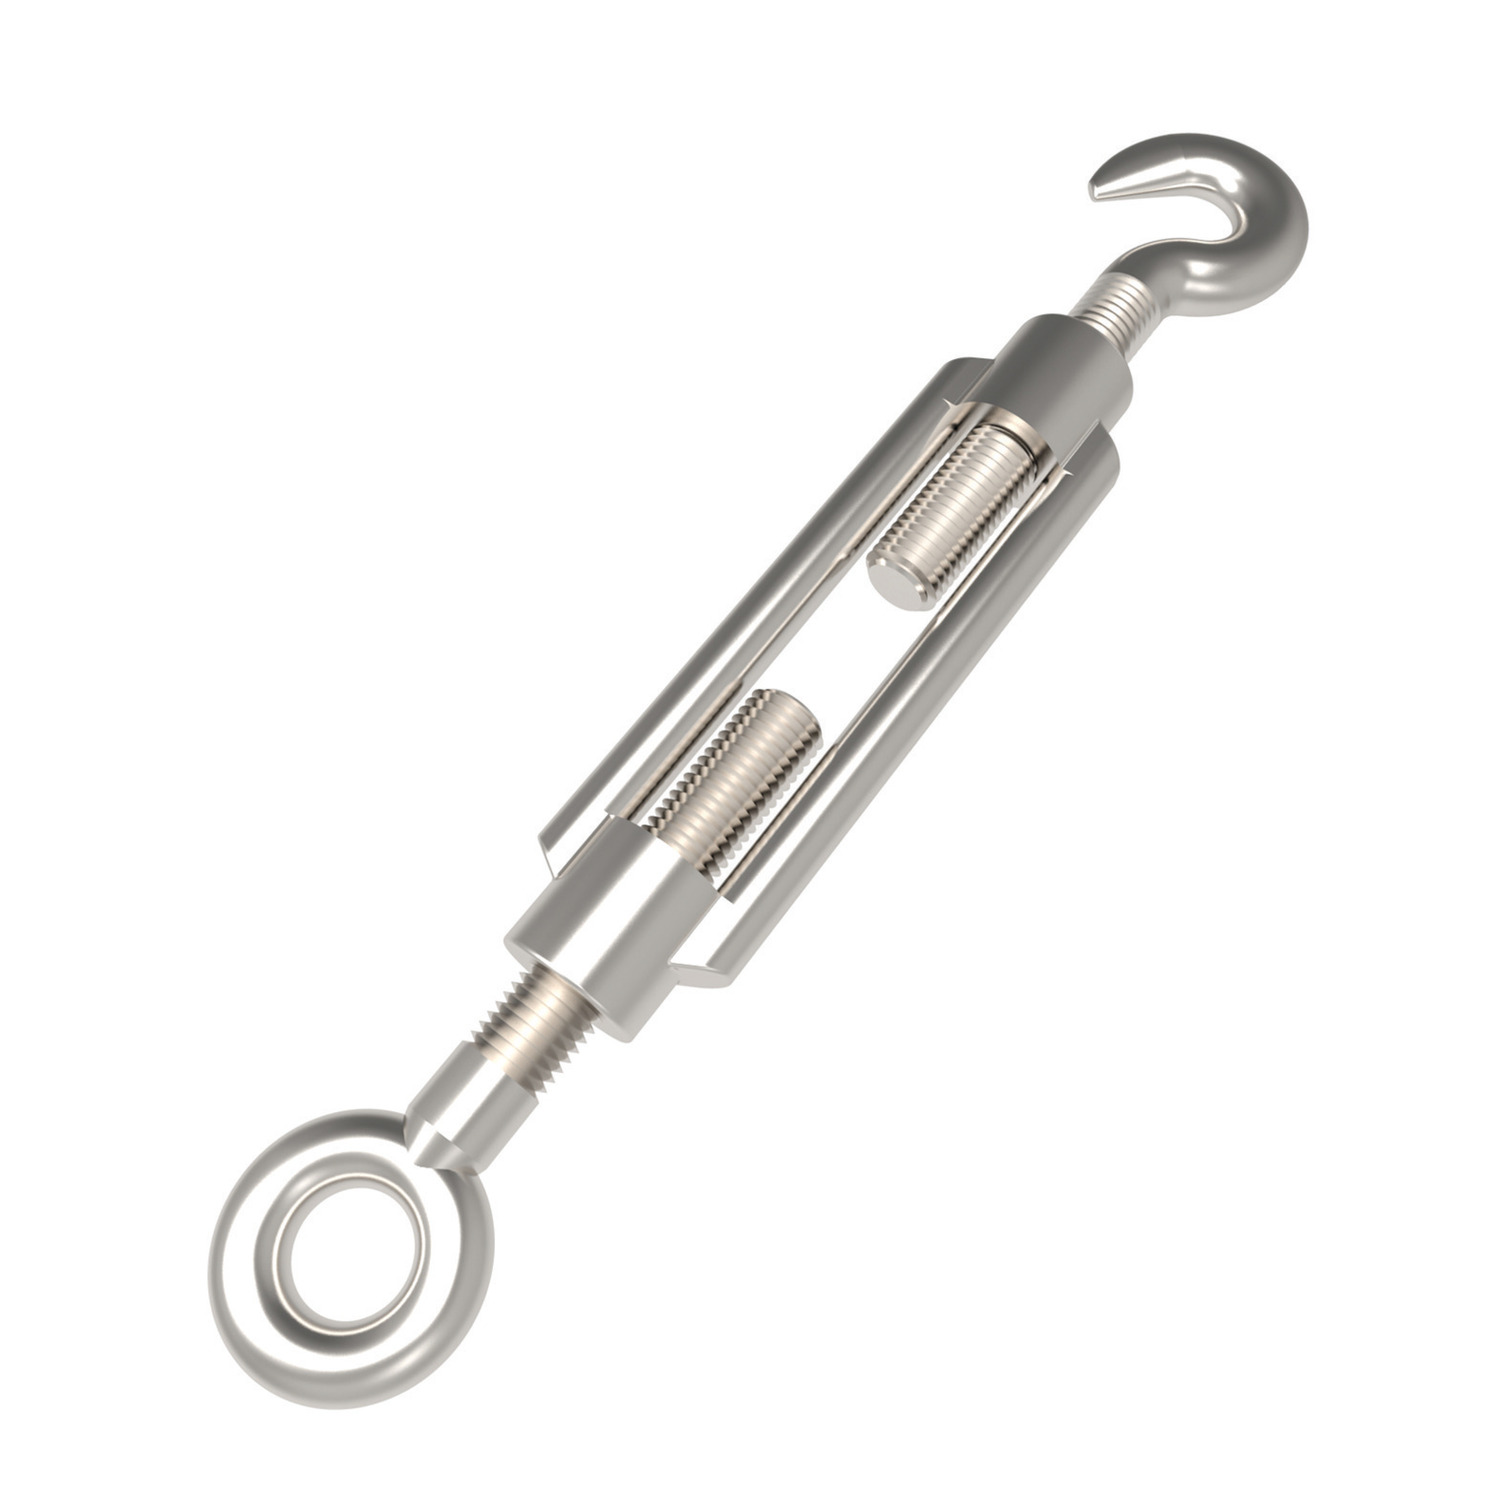 https://www.automotioncomponents.co.uk/media/products/large/hook--eye-turnbuckle-r3852-r.jpg